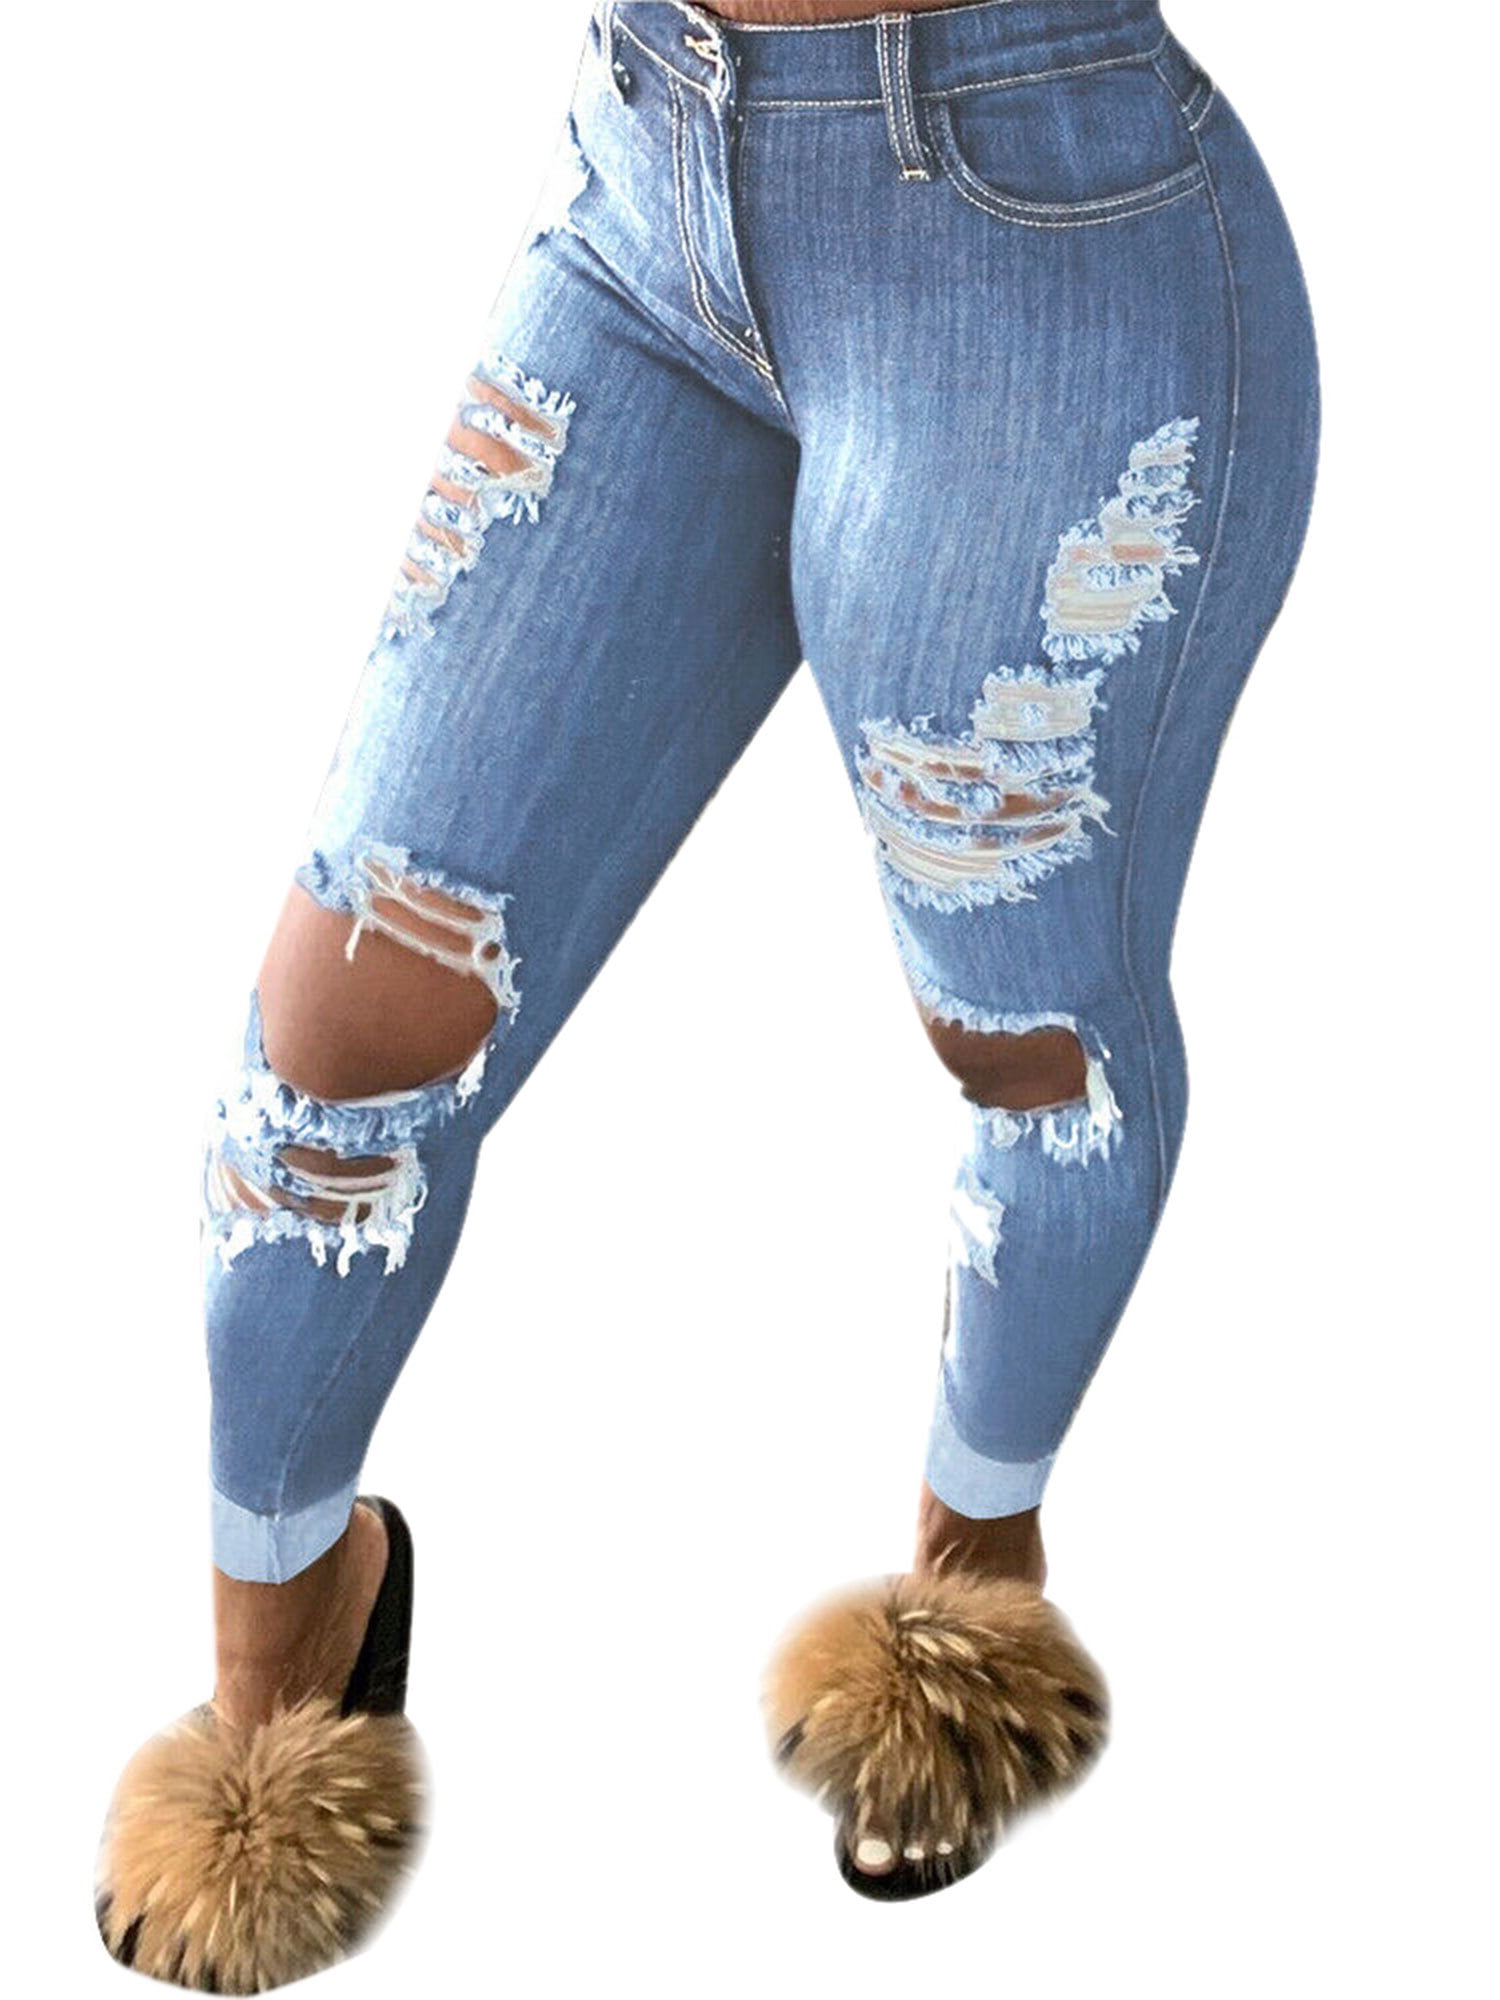 ❤️ Women's Casual Skinny Ripped Stretch Jeans High Waist Denim Pants Trousers US